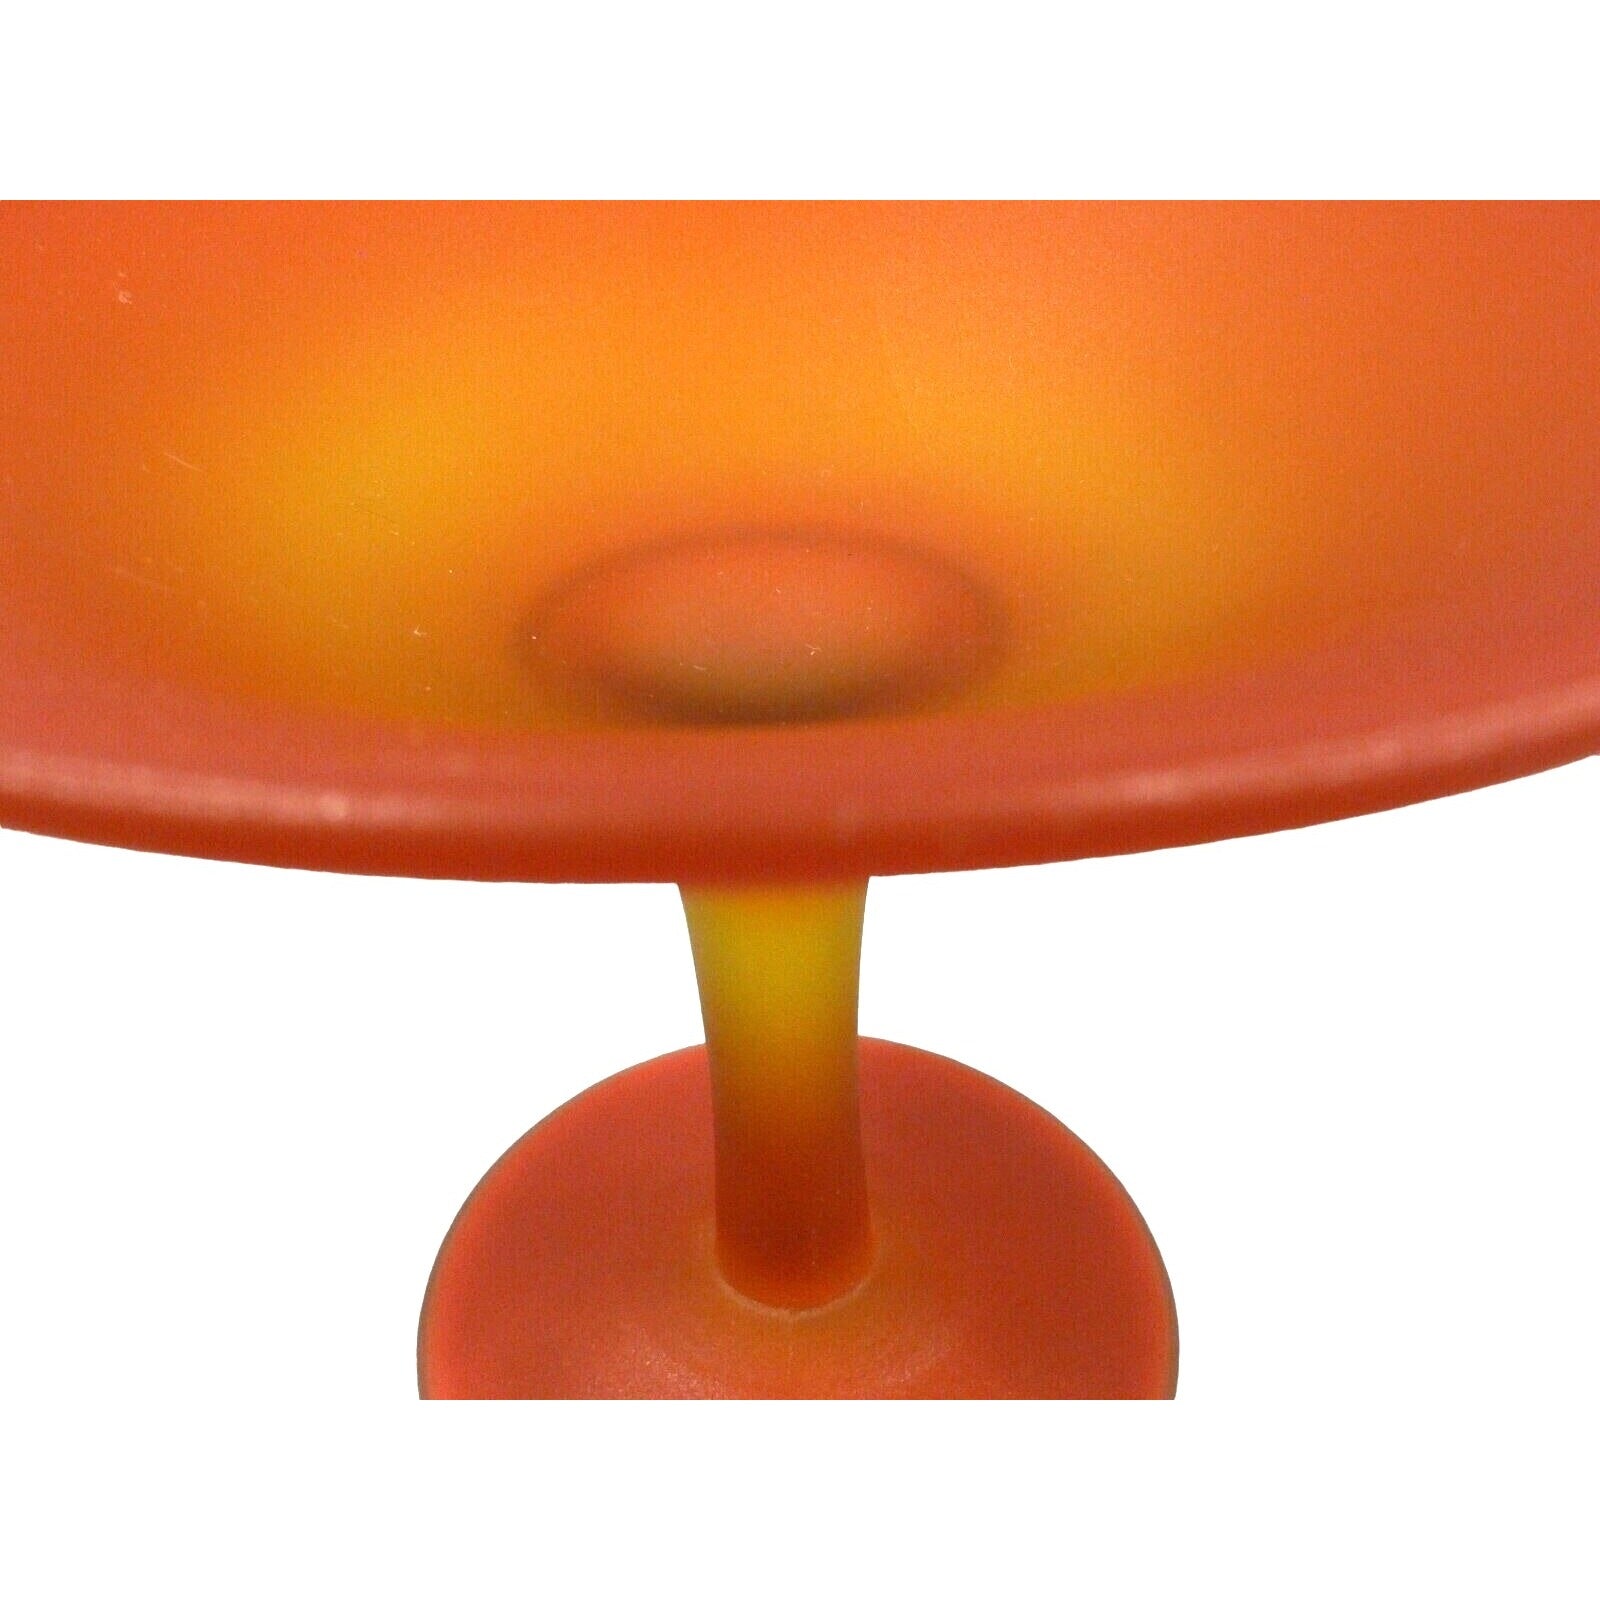 Dish Candy Nut Compote Retro Pedestal Style Matte Finish